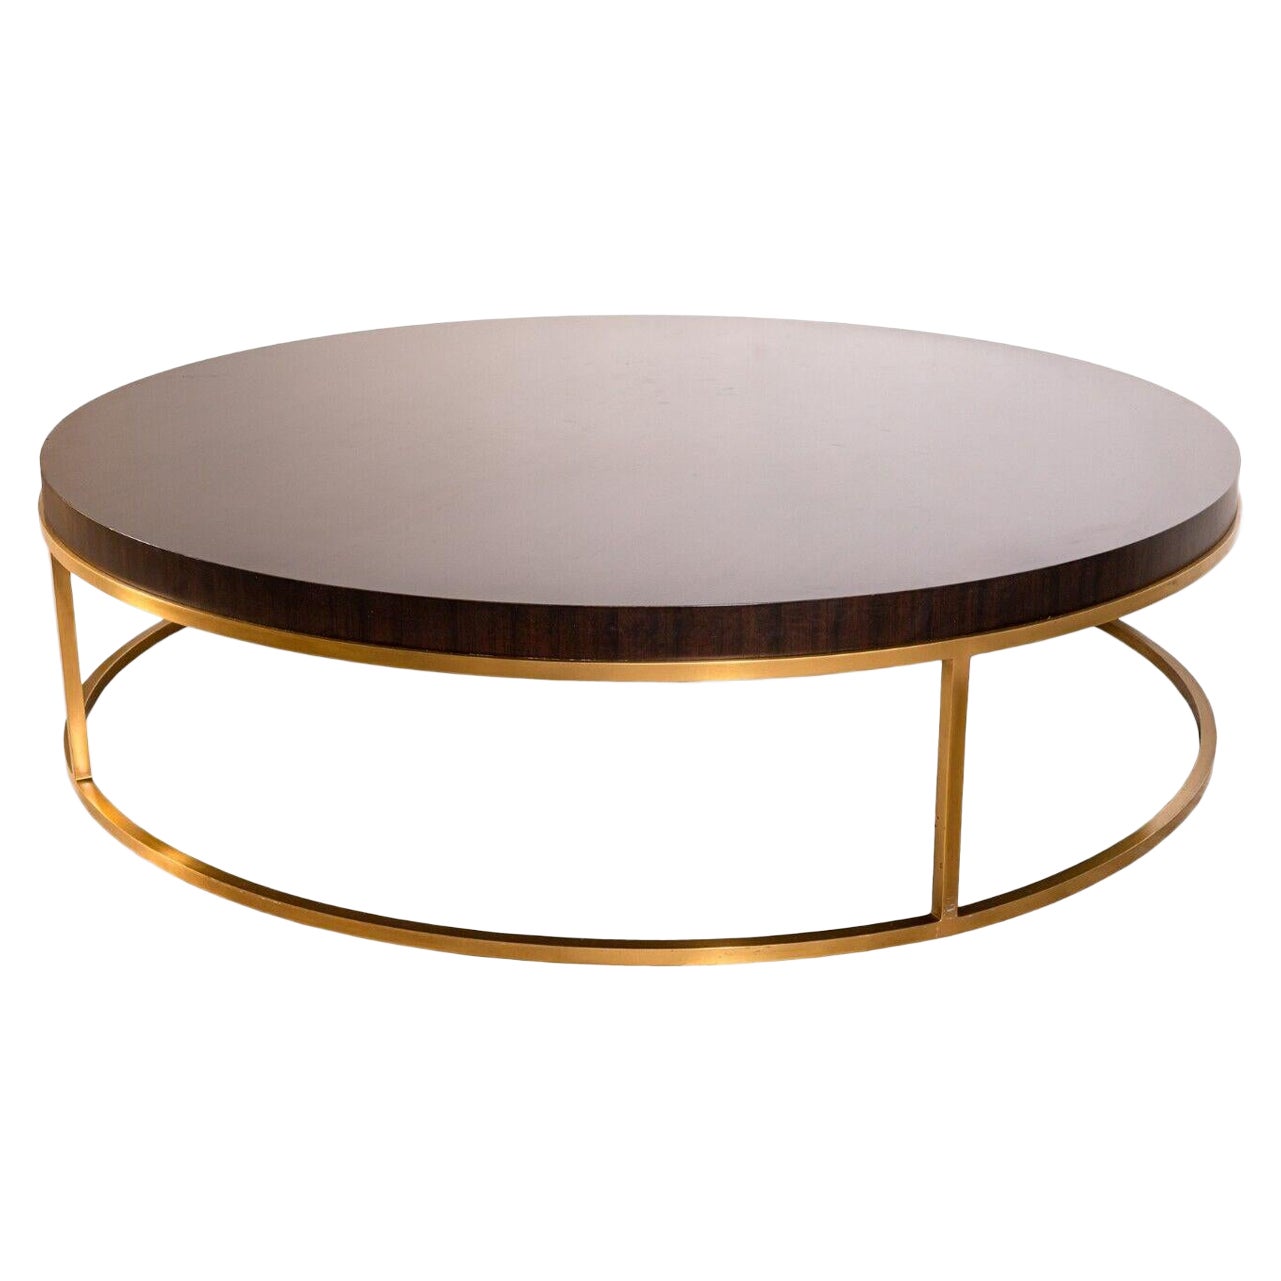 Contemporary Modern Large Round Dark Wood and Brass Coffee Table